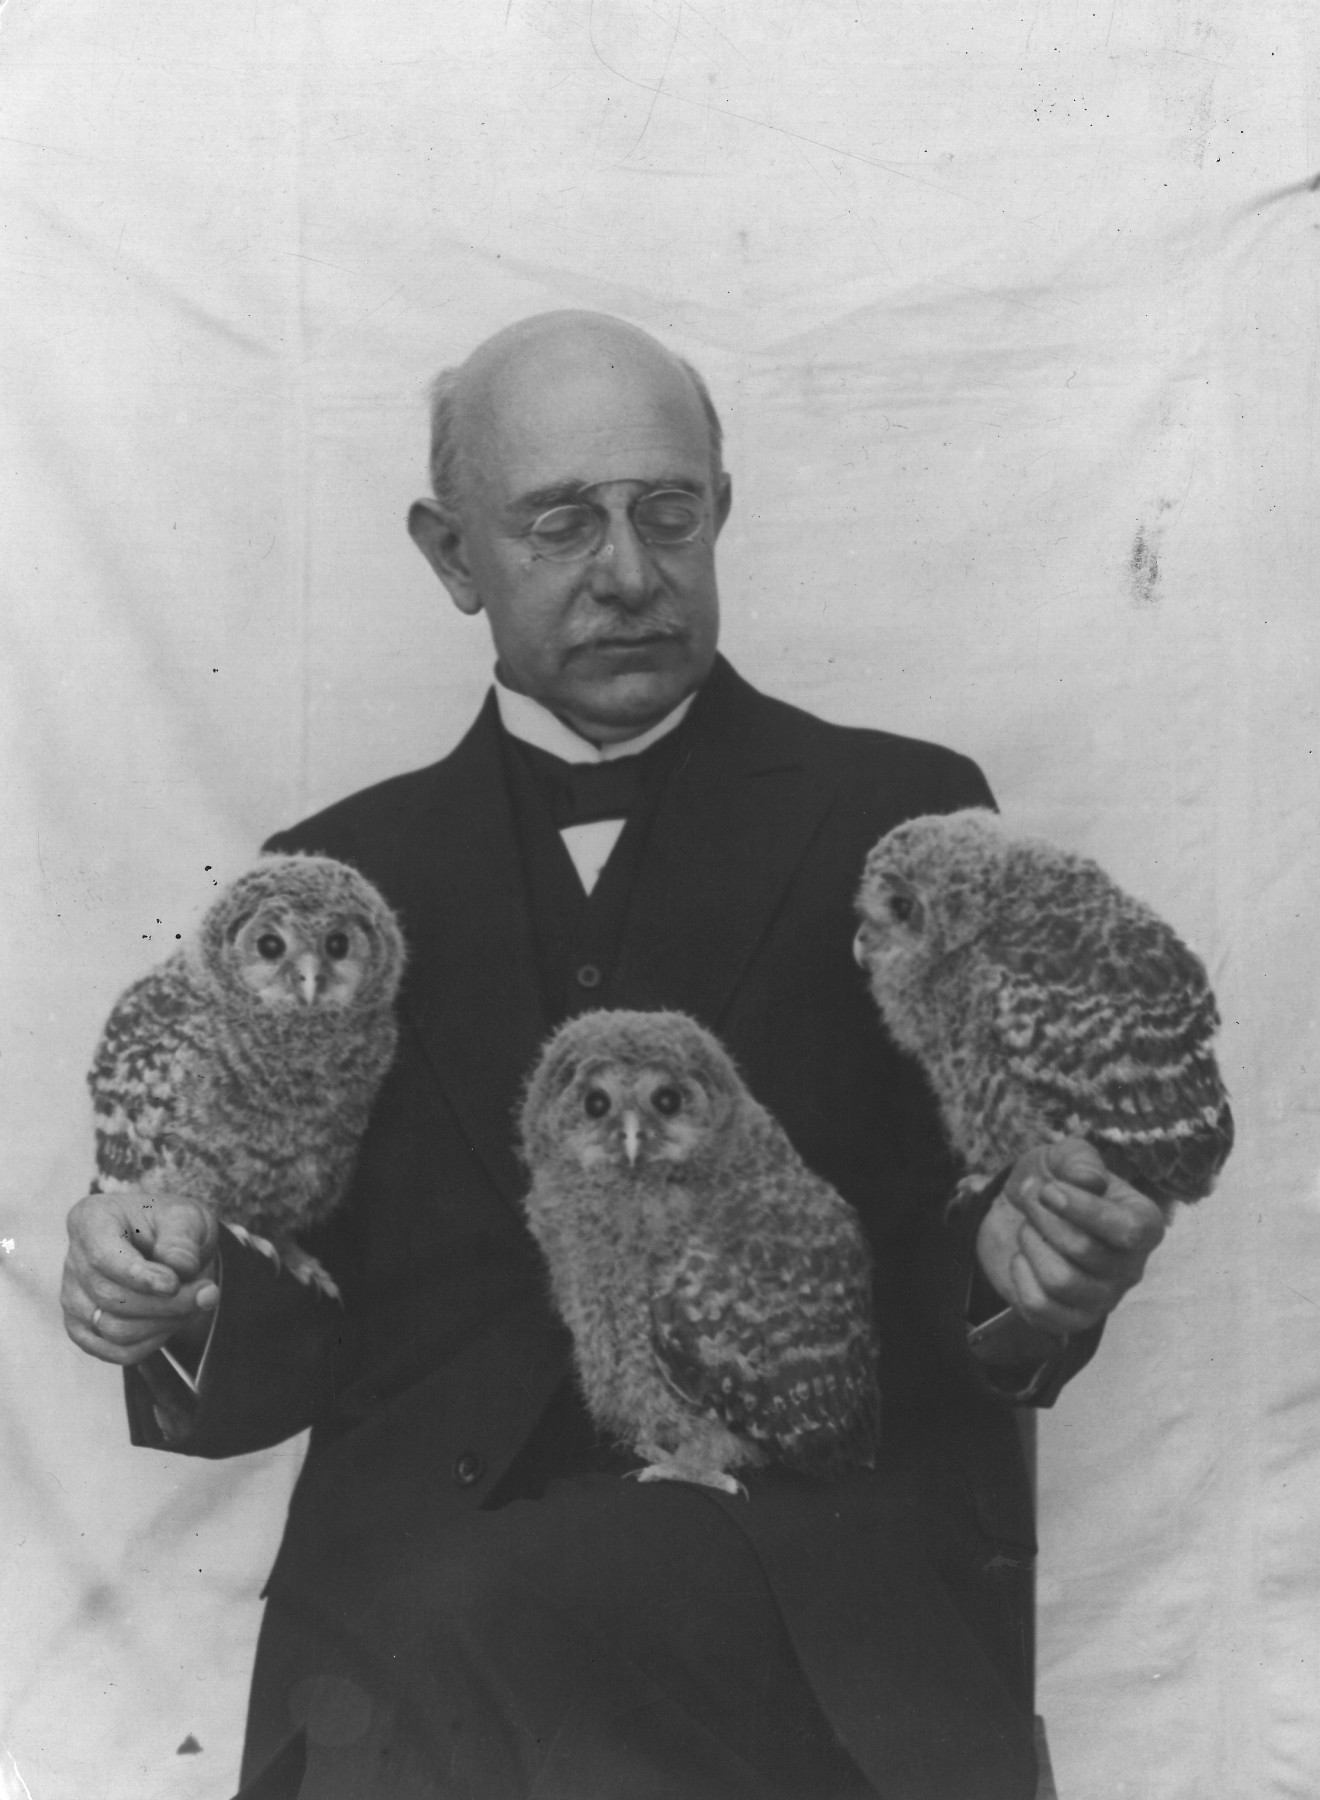 Black and white photograph: A balding older man with a moustache, wearing a pince-nez and a suit, looks down at three Ural owls, one sitting on each of his arms and the third on one of his legs, which he has bent into a perch. Two of the owls are looking into the camera and one to the side.